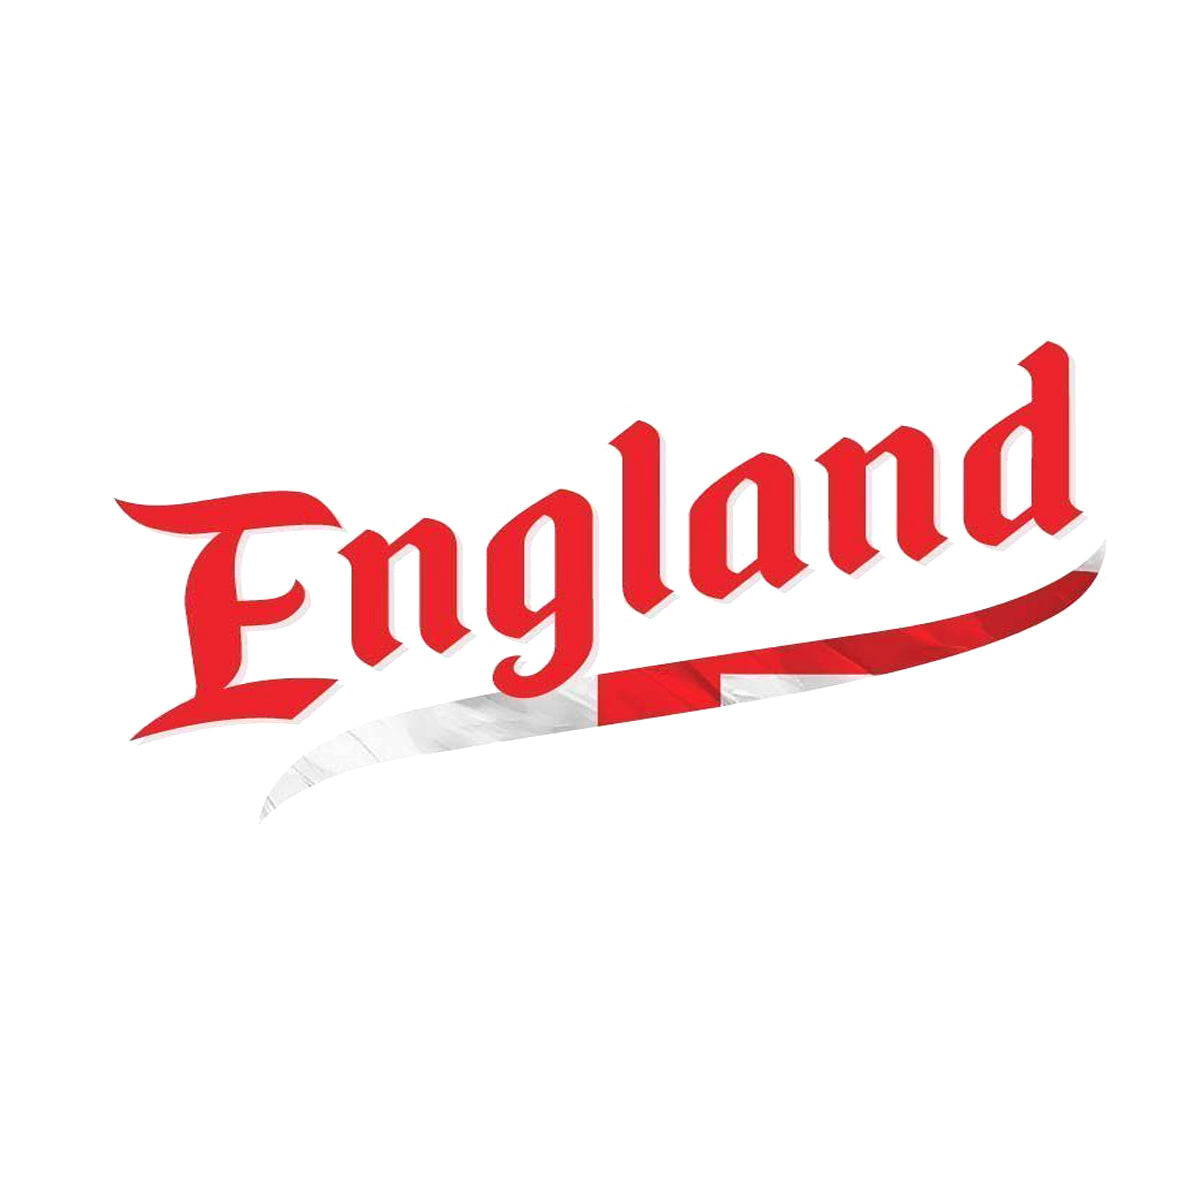 England Script World Cup 2022 Printed Tee T-shirts 411 